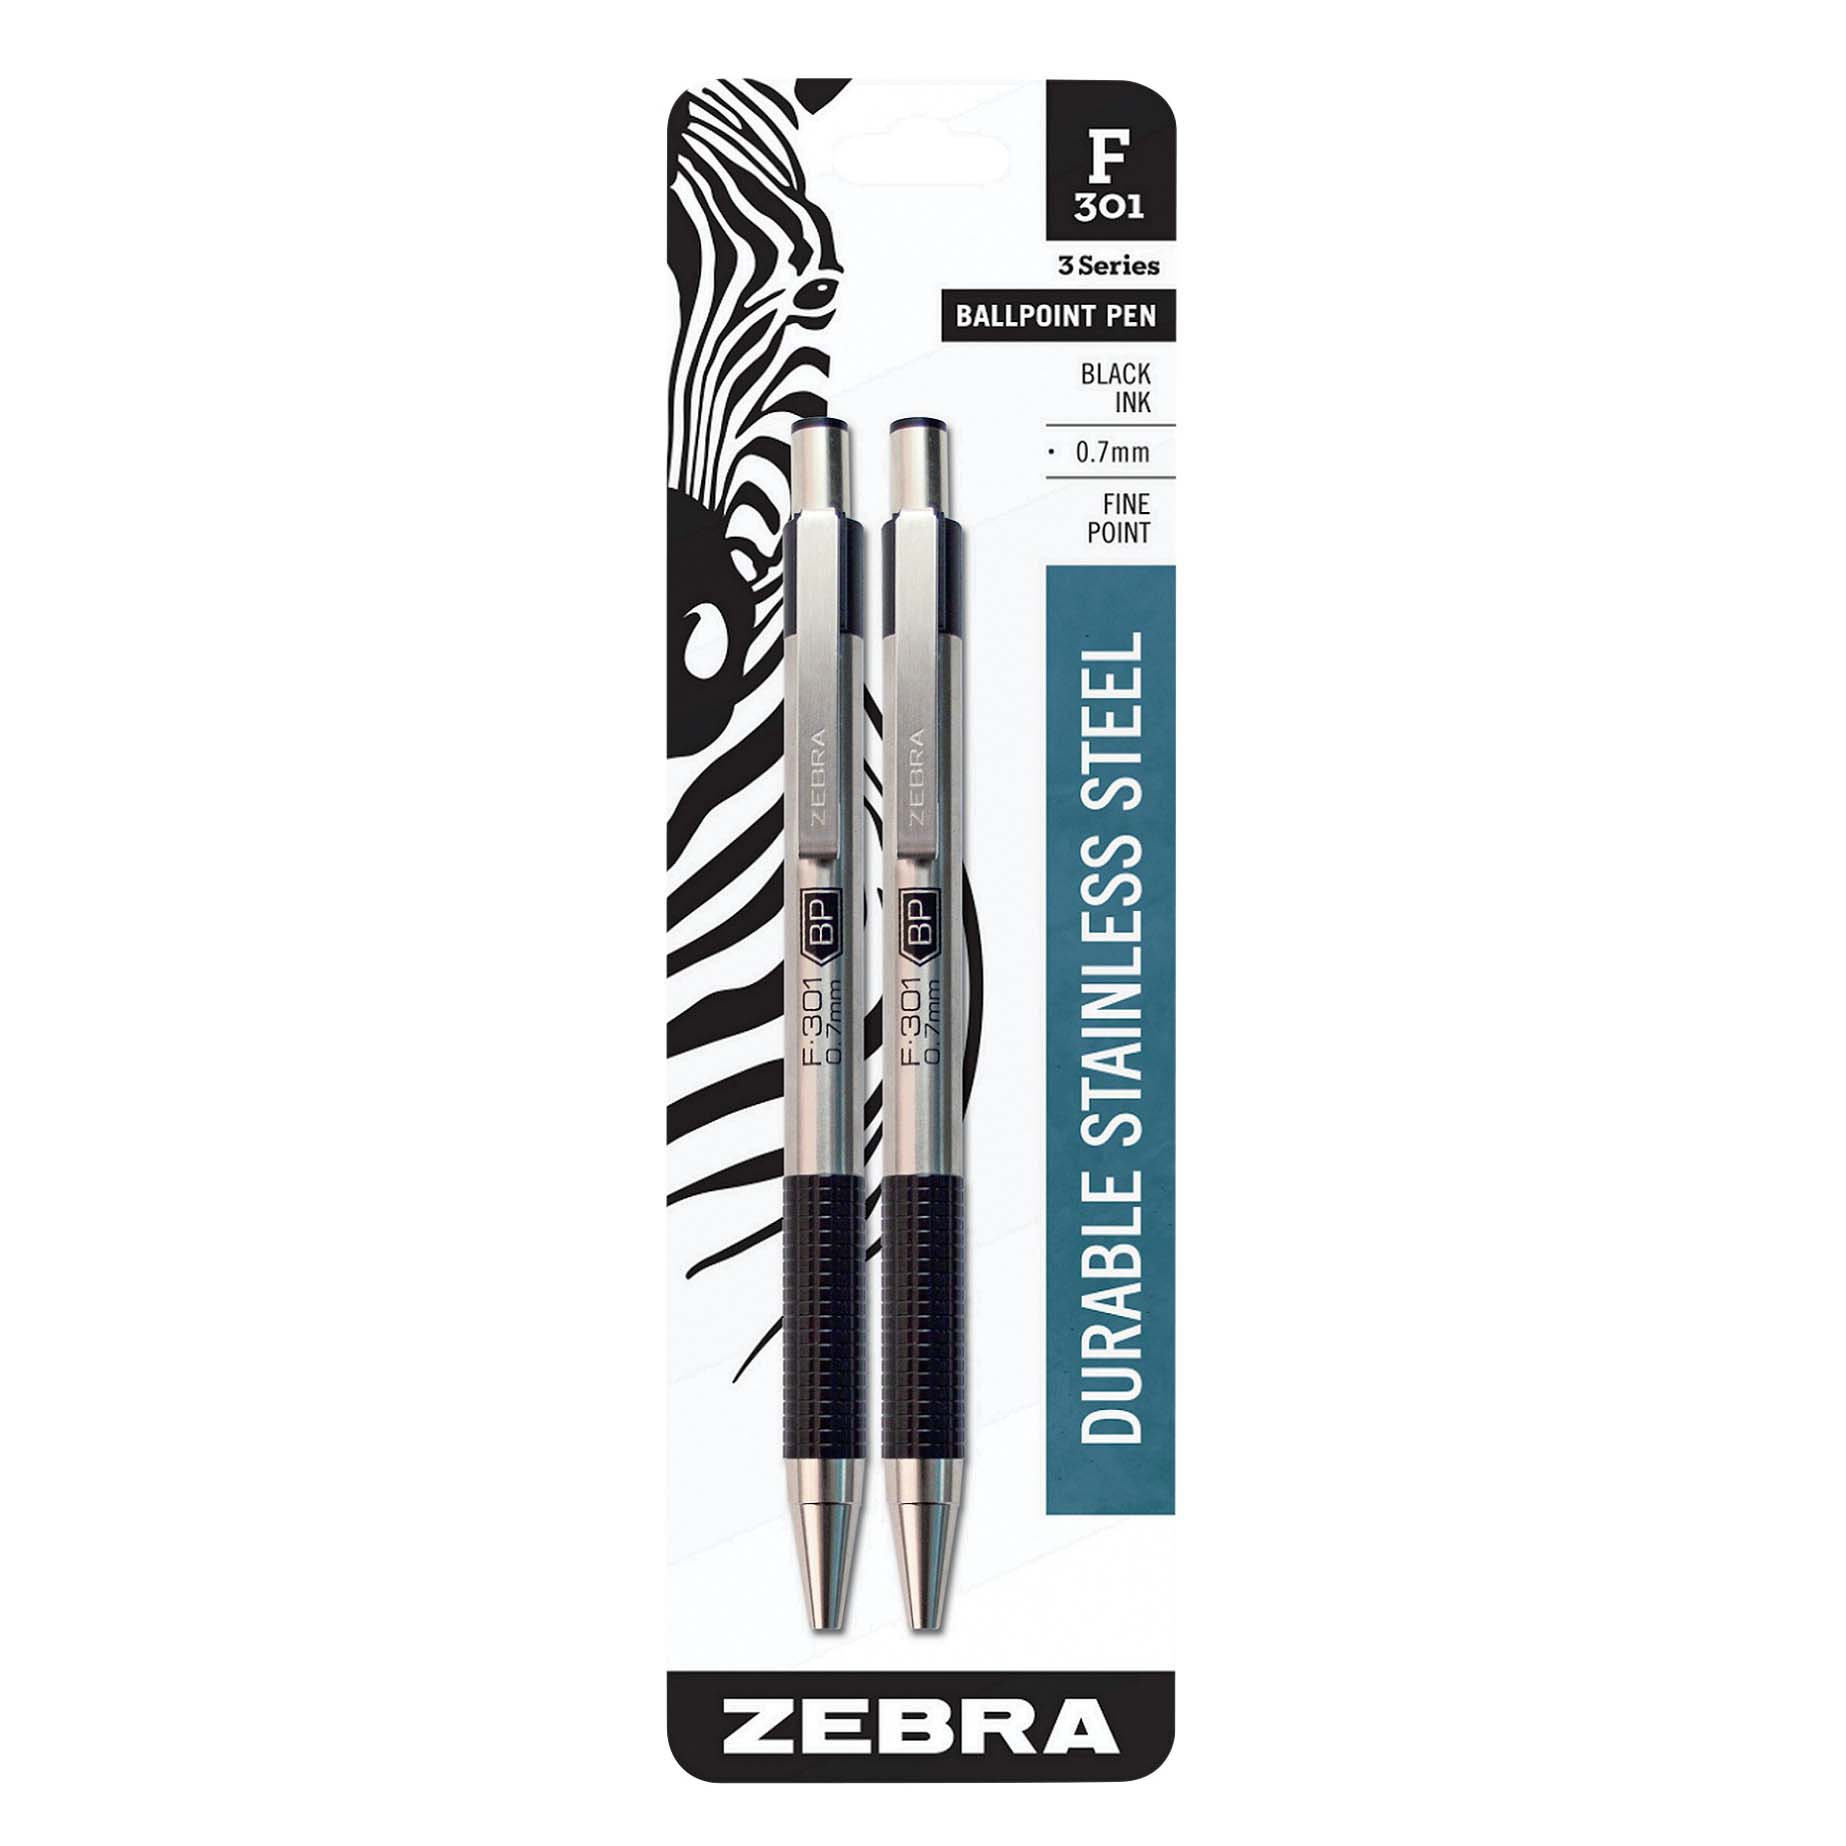 Details about    Fine Point Ball Point Pen 301 Black Ink 2/pack zebra f 